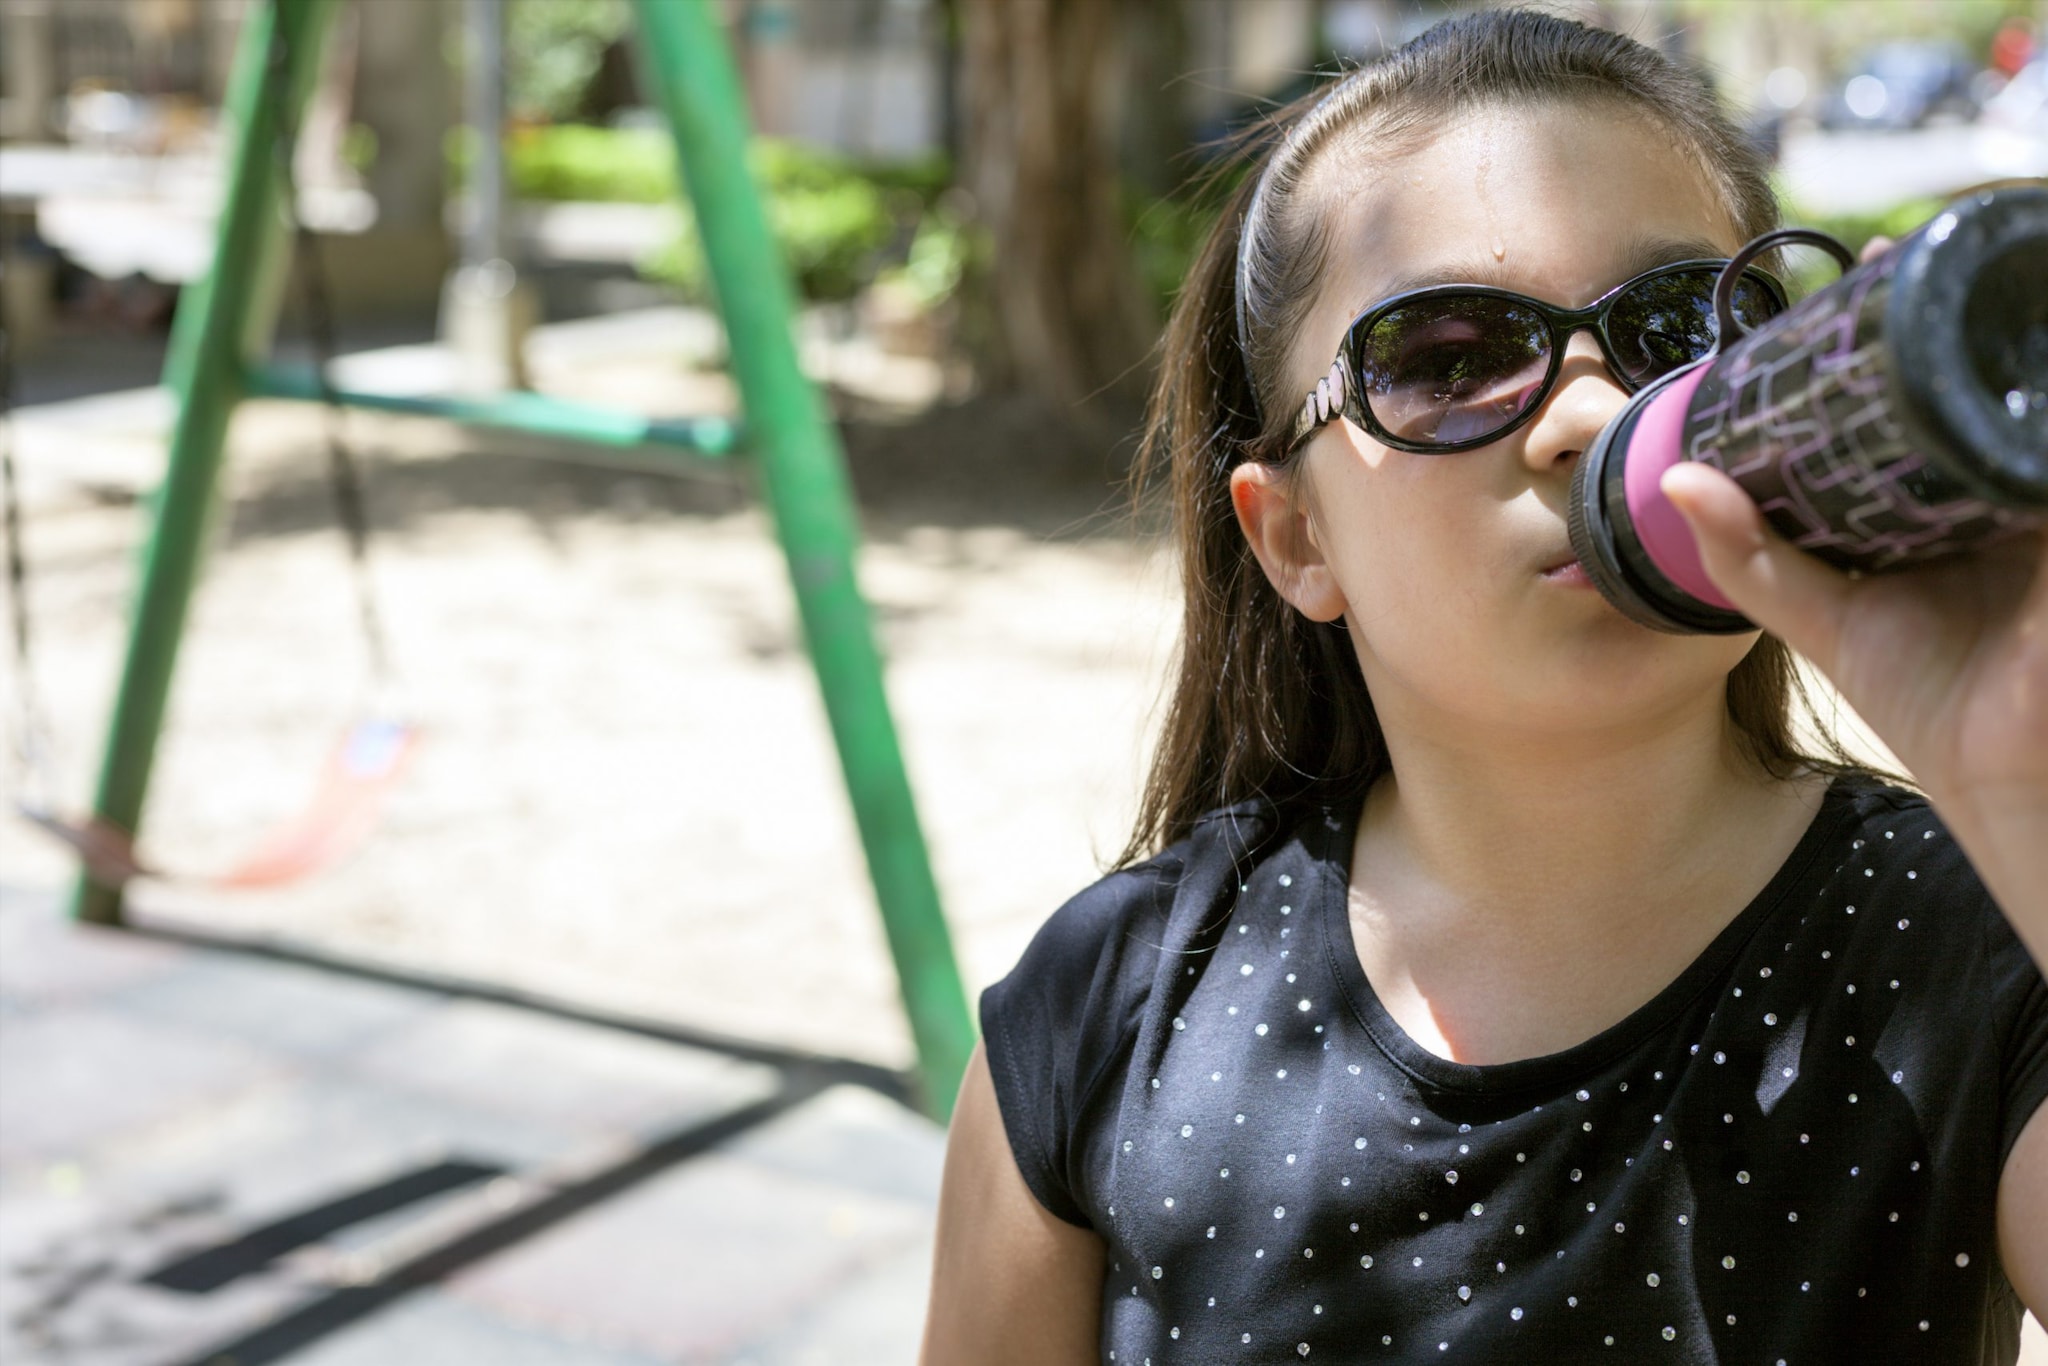 Girl with water bottle on playground